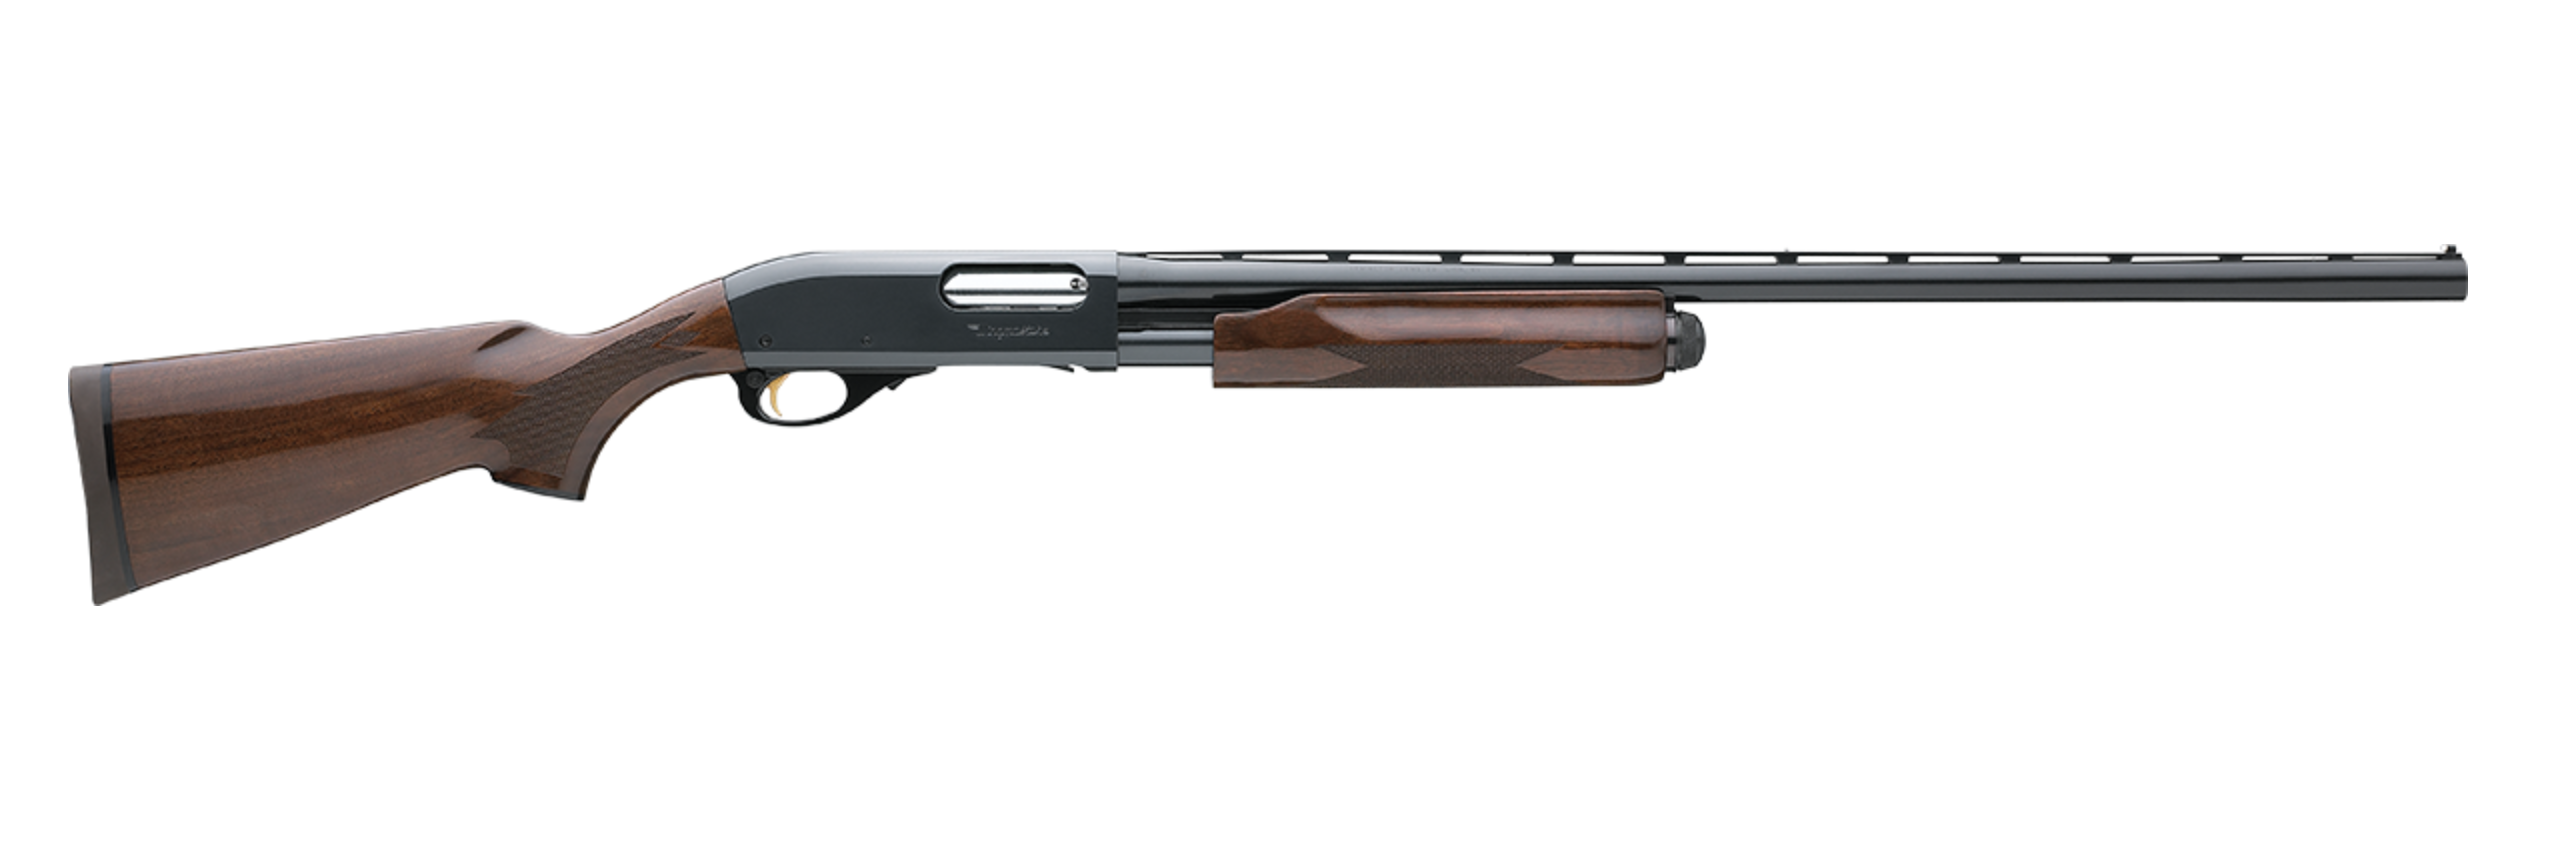 wood-stock pump action shotgun with a black barrel and receiver